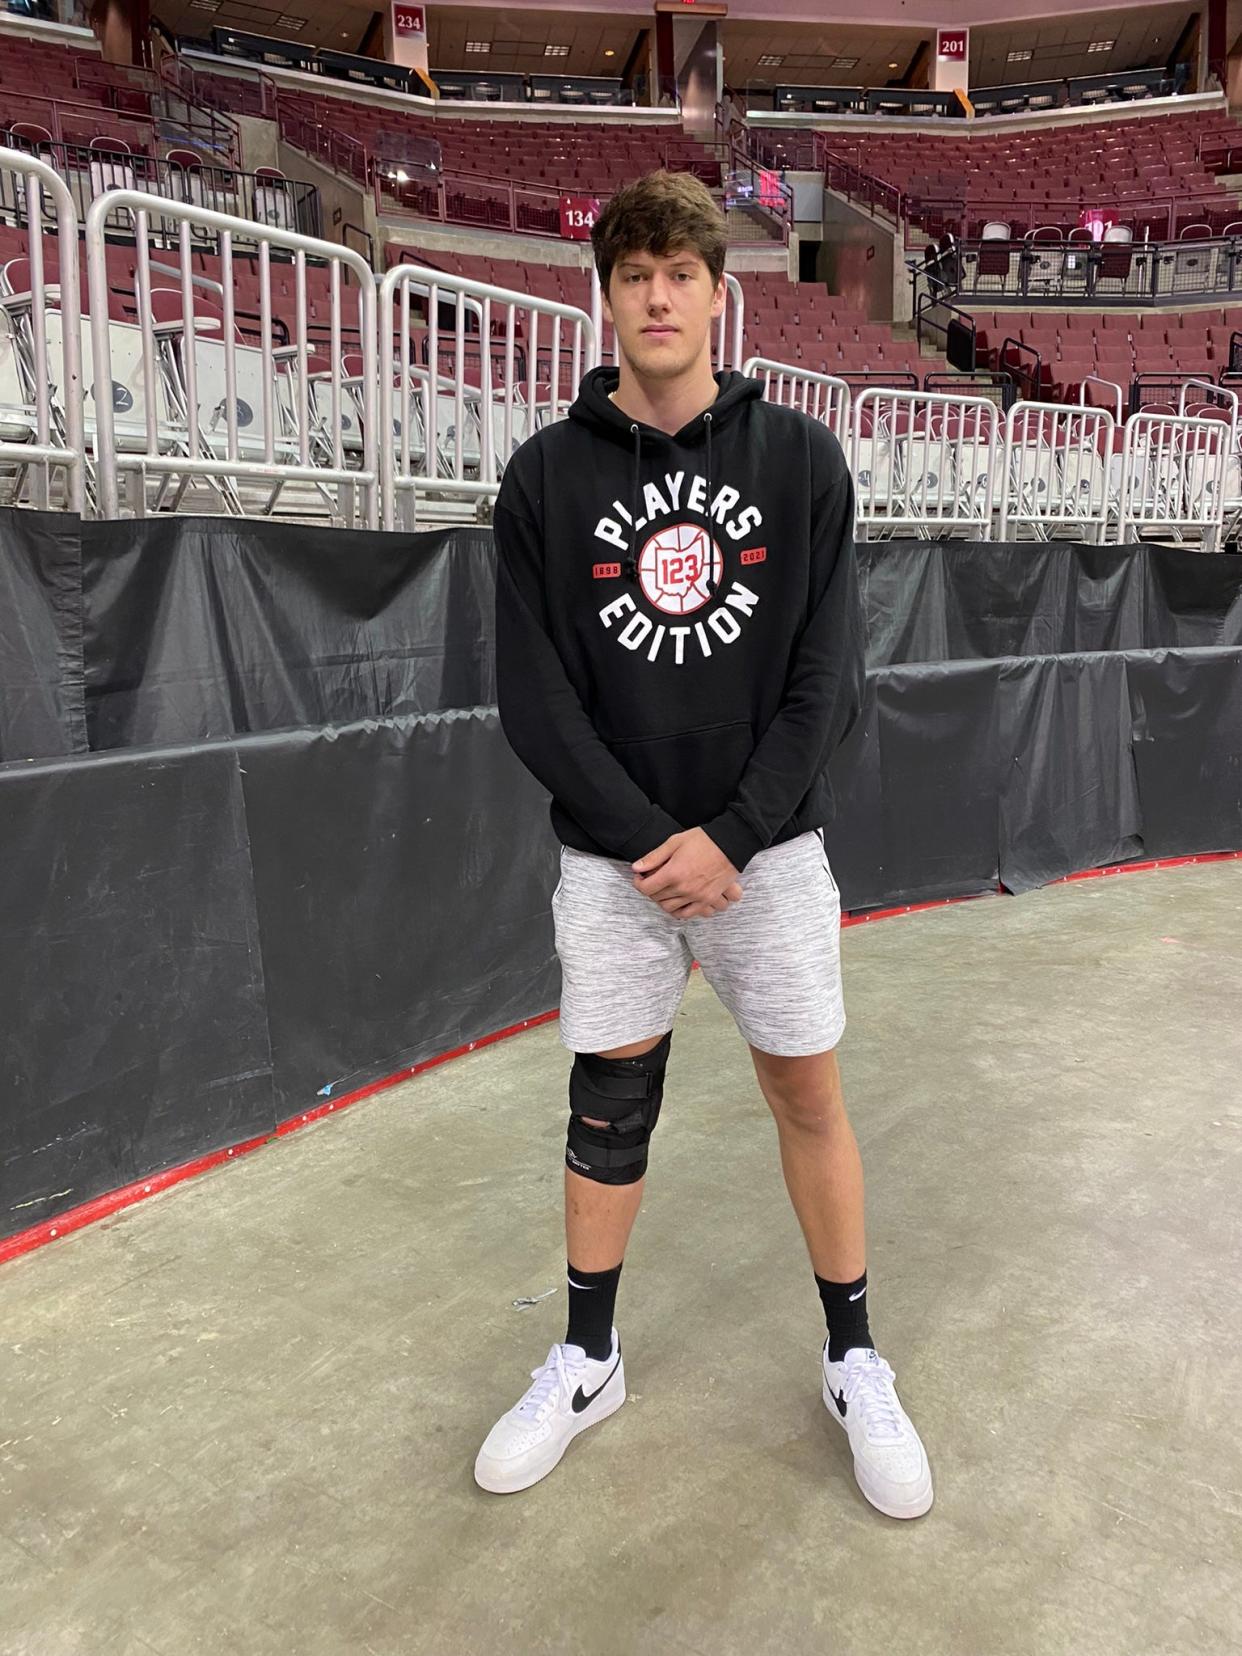 Austin Parks, a 2023 Ohio State commitment from St. Marys (Ohio) Memorial, watched his team participate at Ohio State's 2022 team camp while recovering from a knee injury.